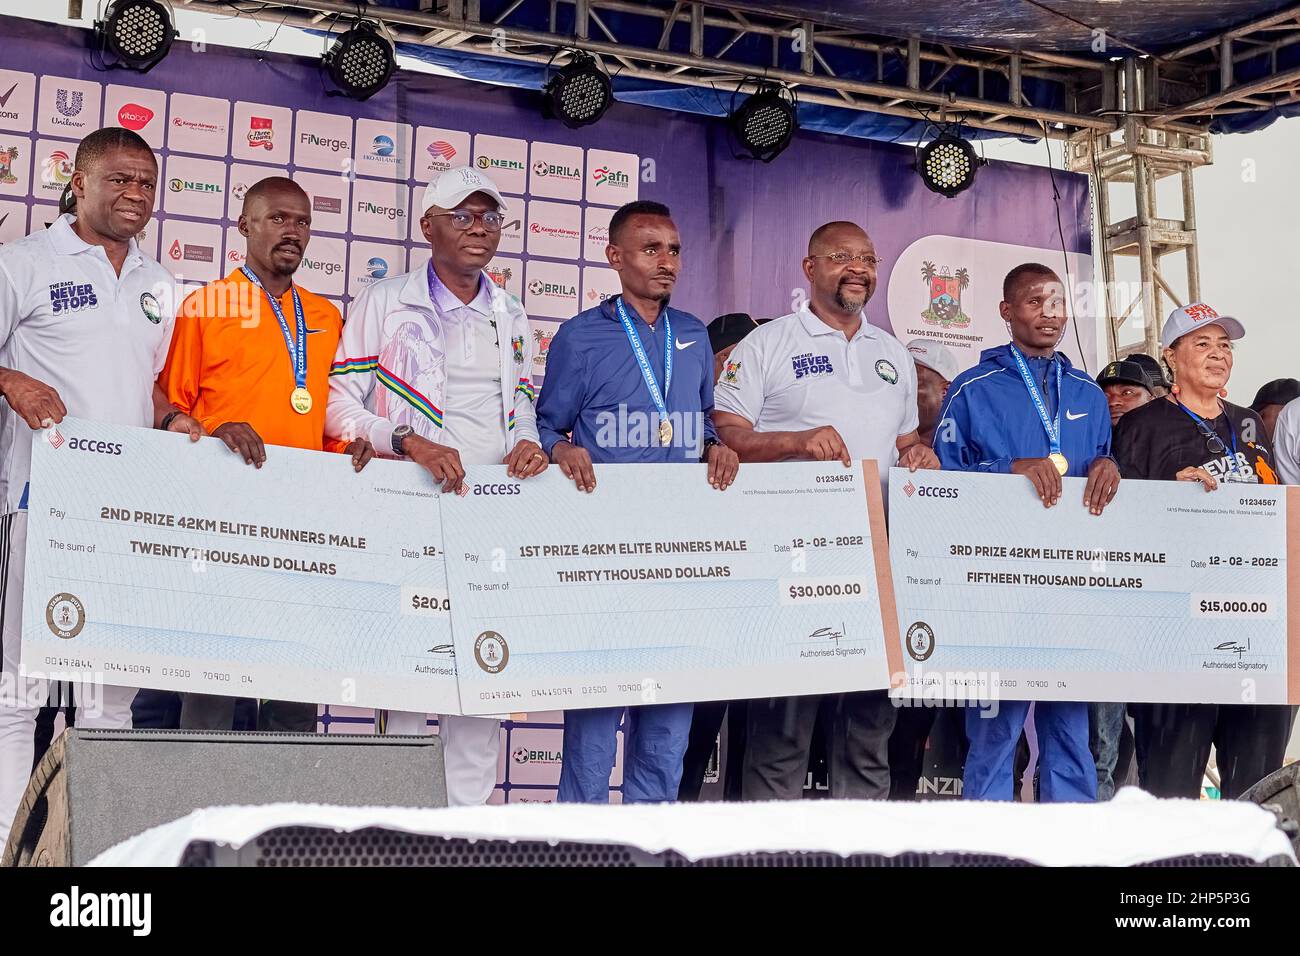 Men elite marathon winners are pictured with their medal and prize money after competing in the Access Bank Lagos City Marathon on February 12, 2022. Stock Photo